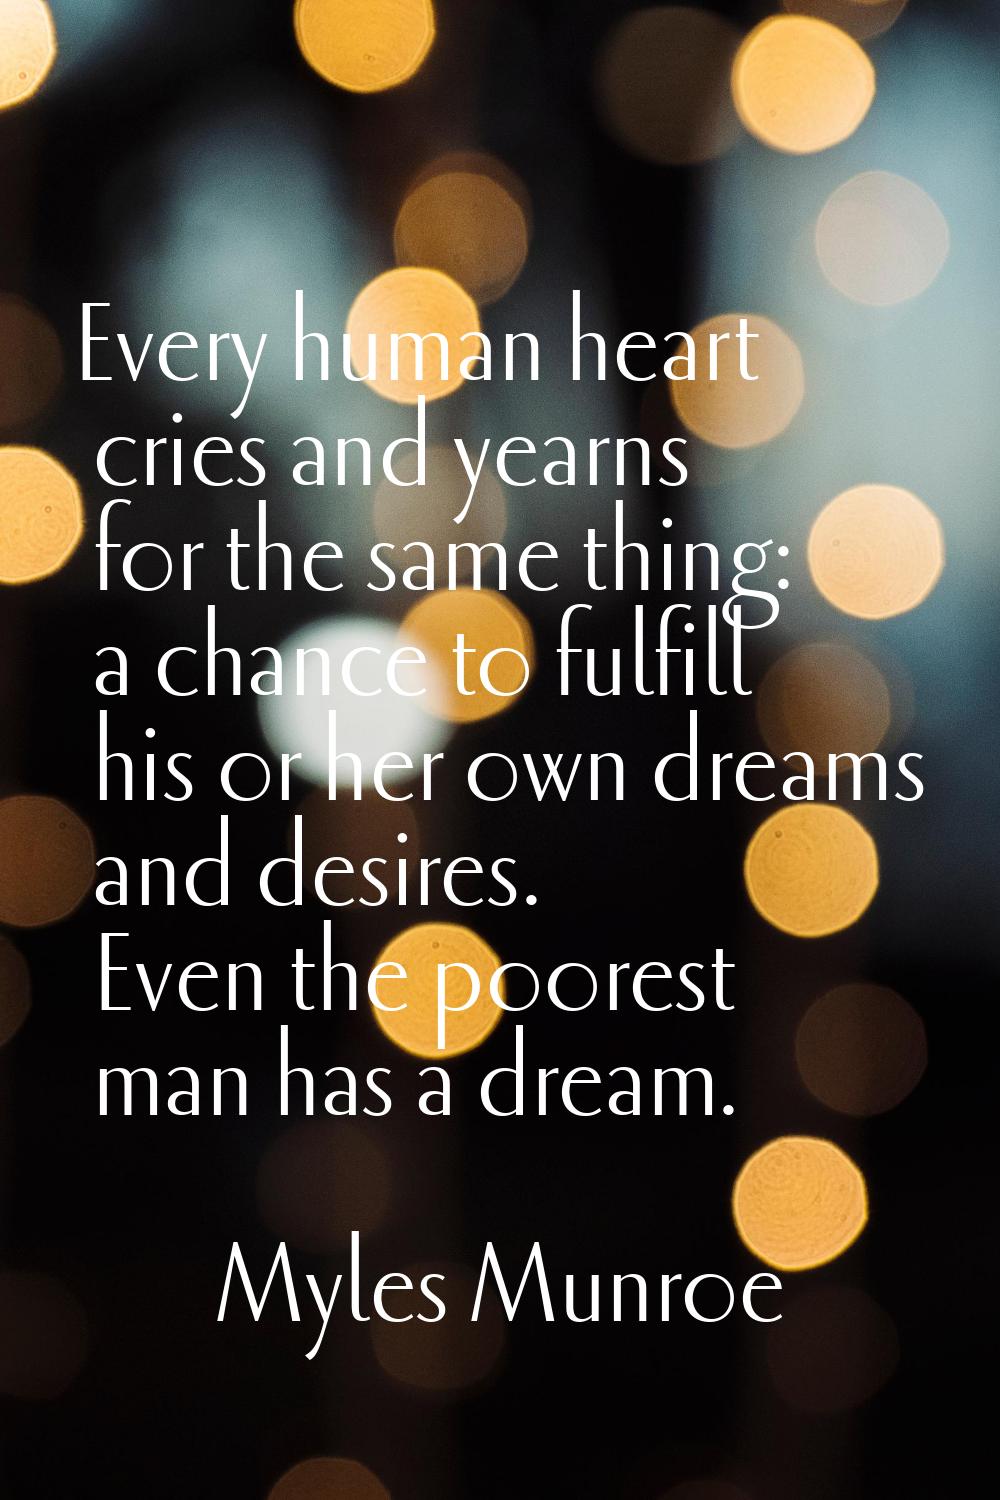 Every human heart cries and yearns for the same thing: a chance to fulfill his or her own dreams an